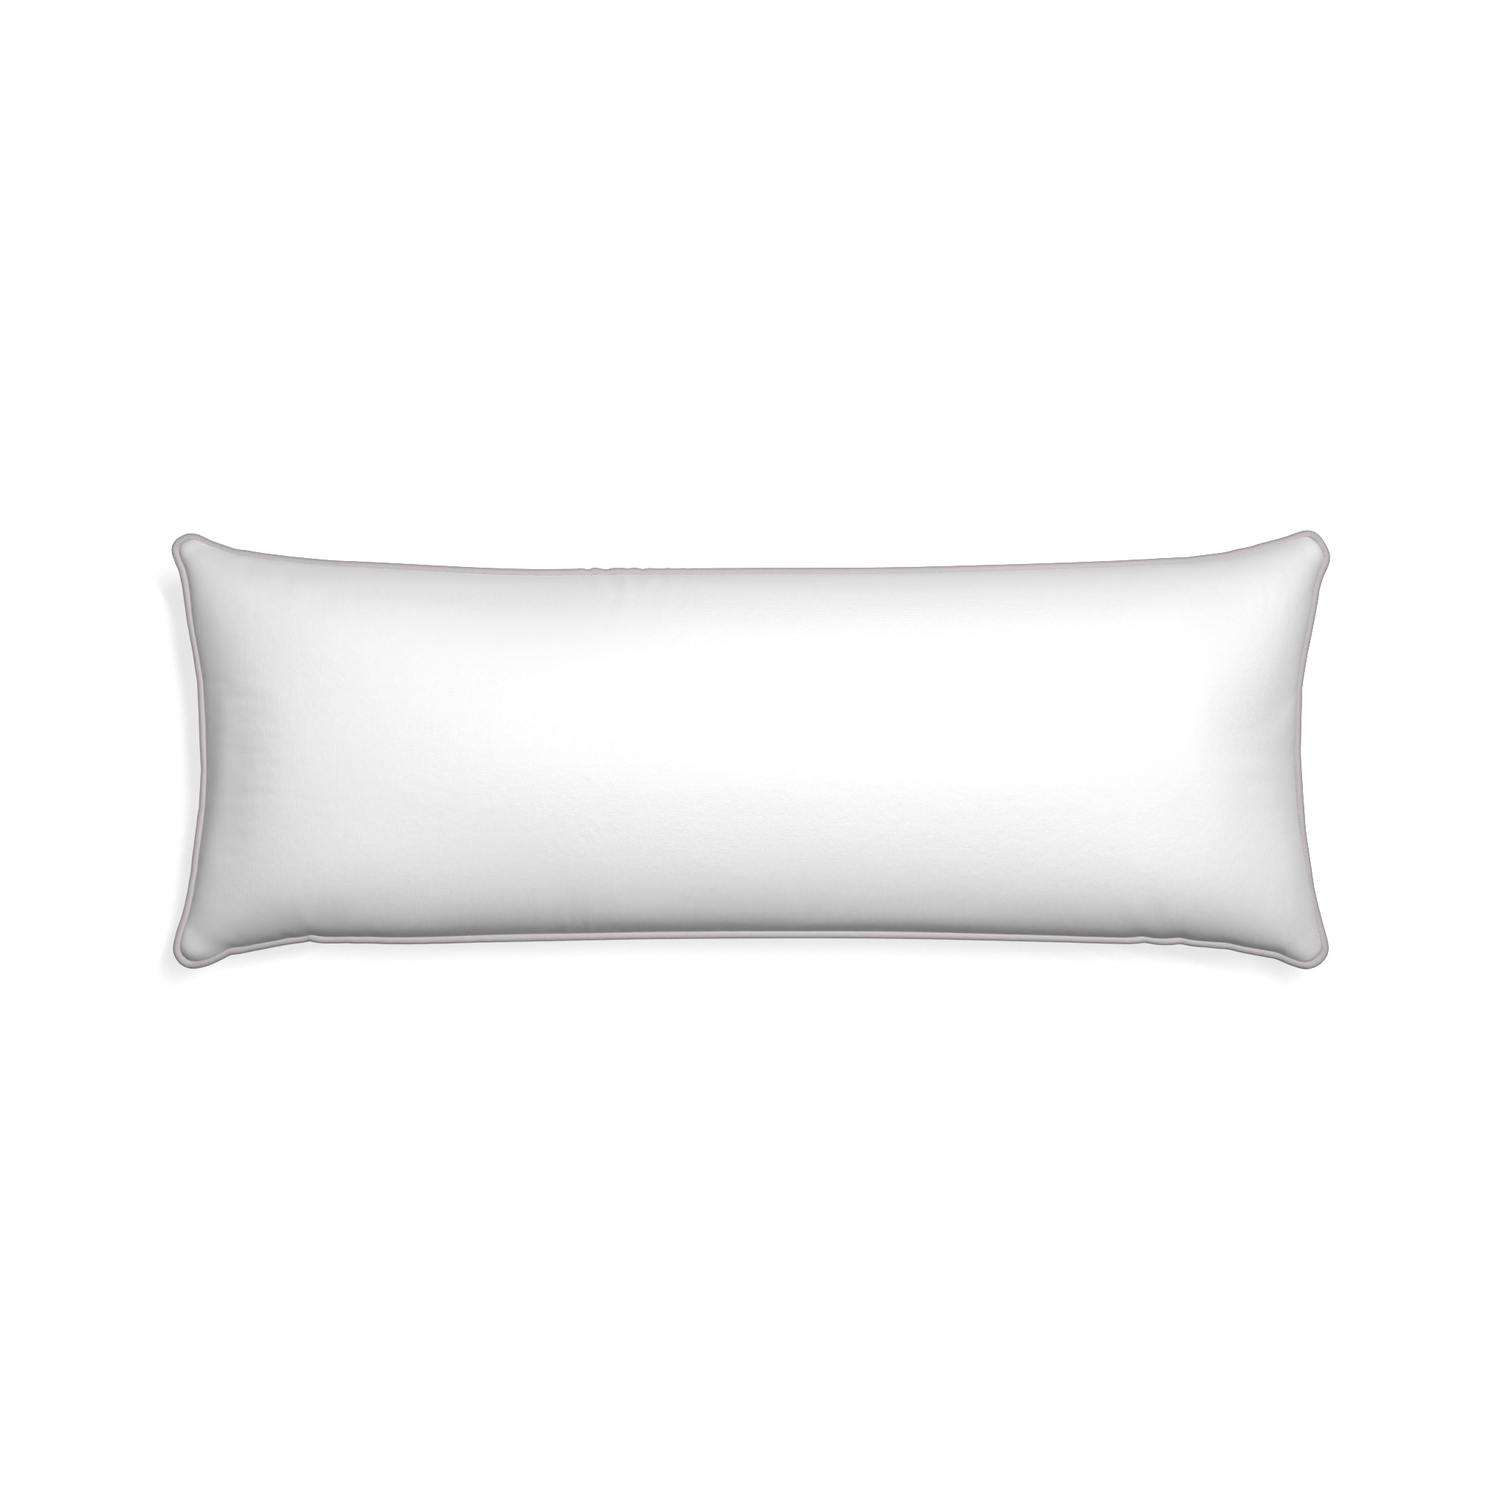 Xl-lumbar snow custom white cottonpillow with pebble piping on white background